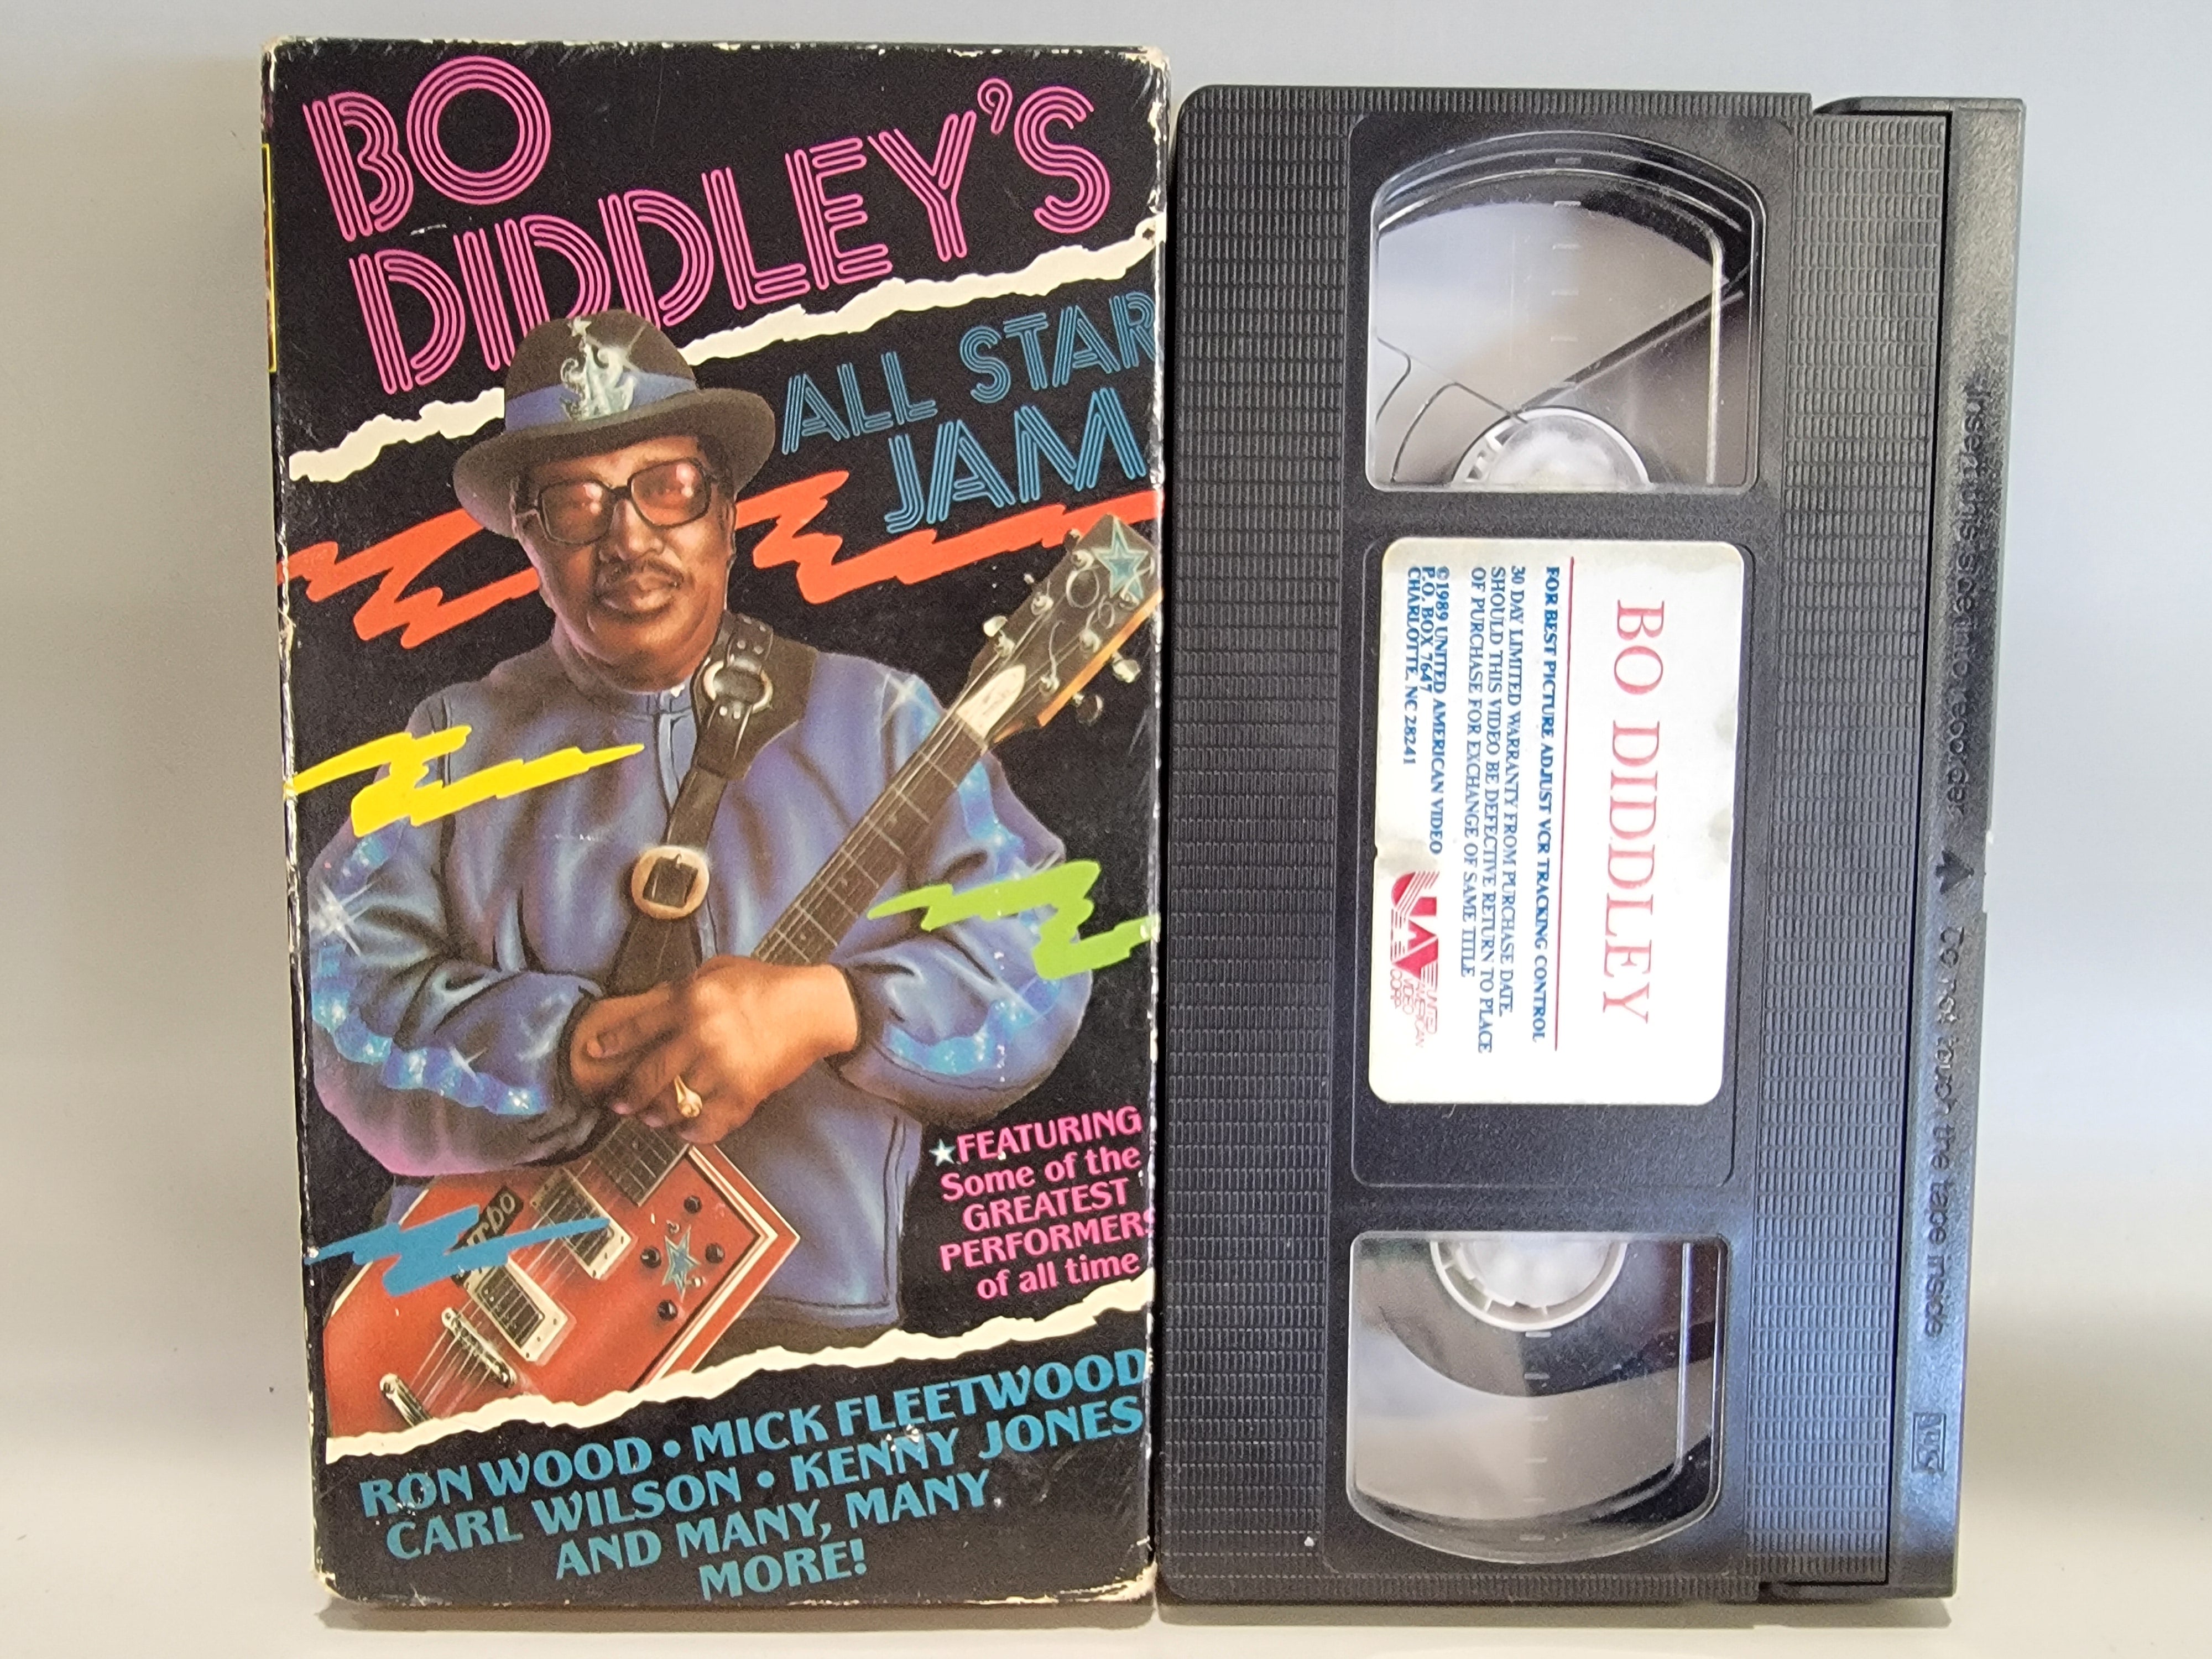 BO DIDDLEY'S ALL STAR JAM VHS [USED]